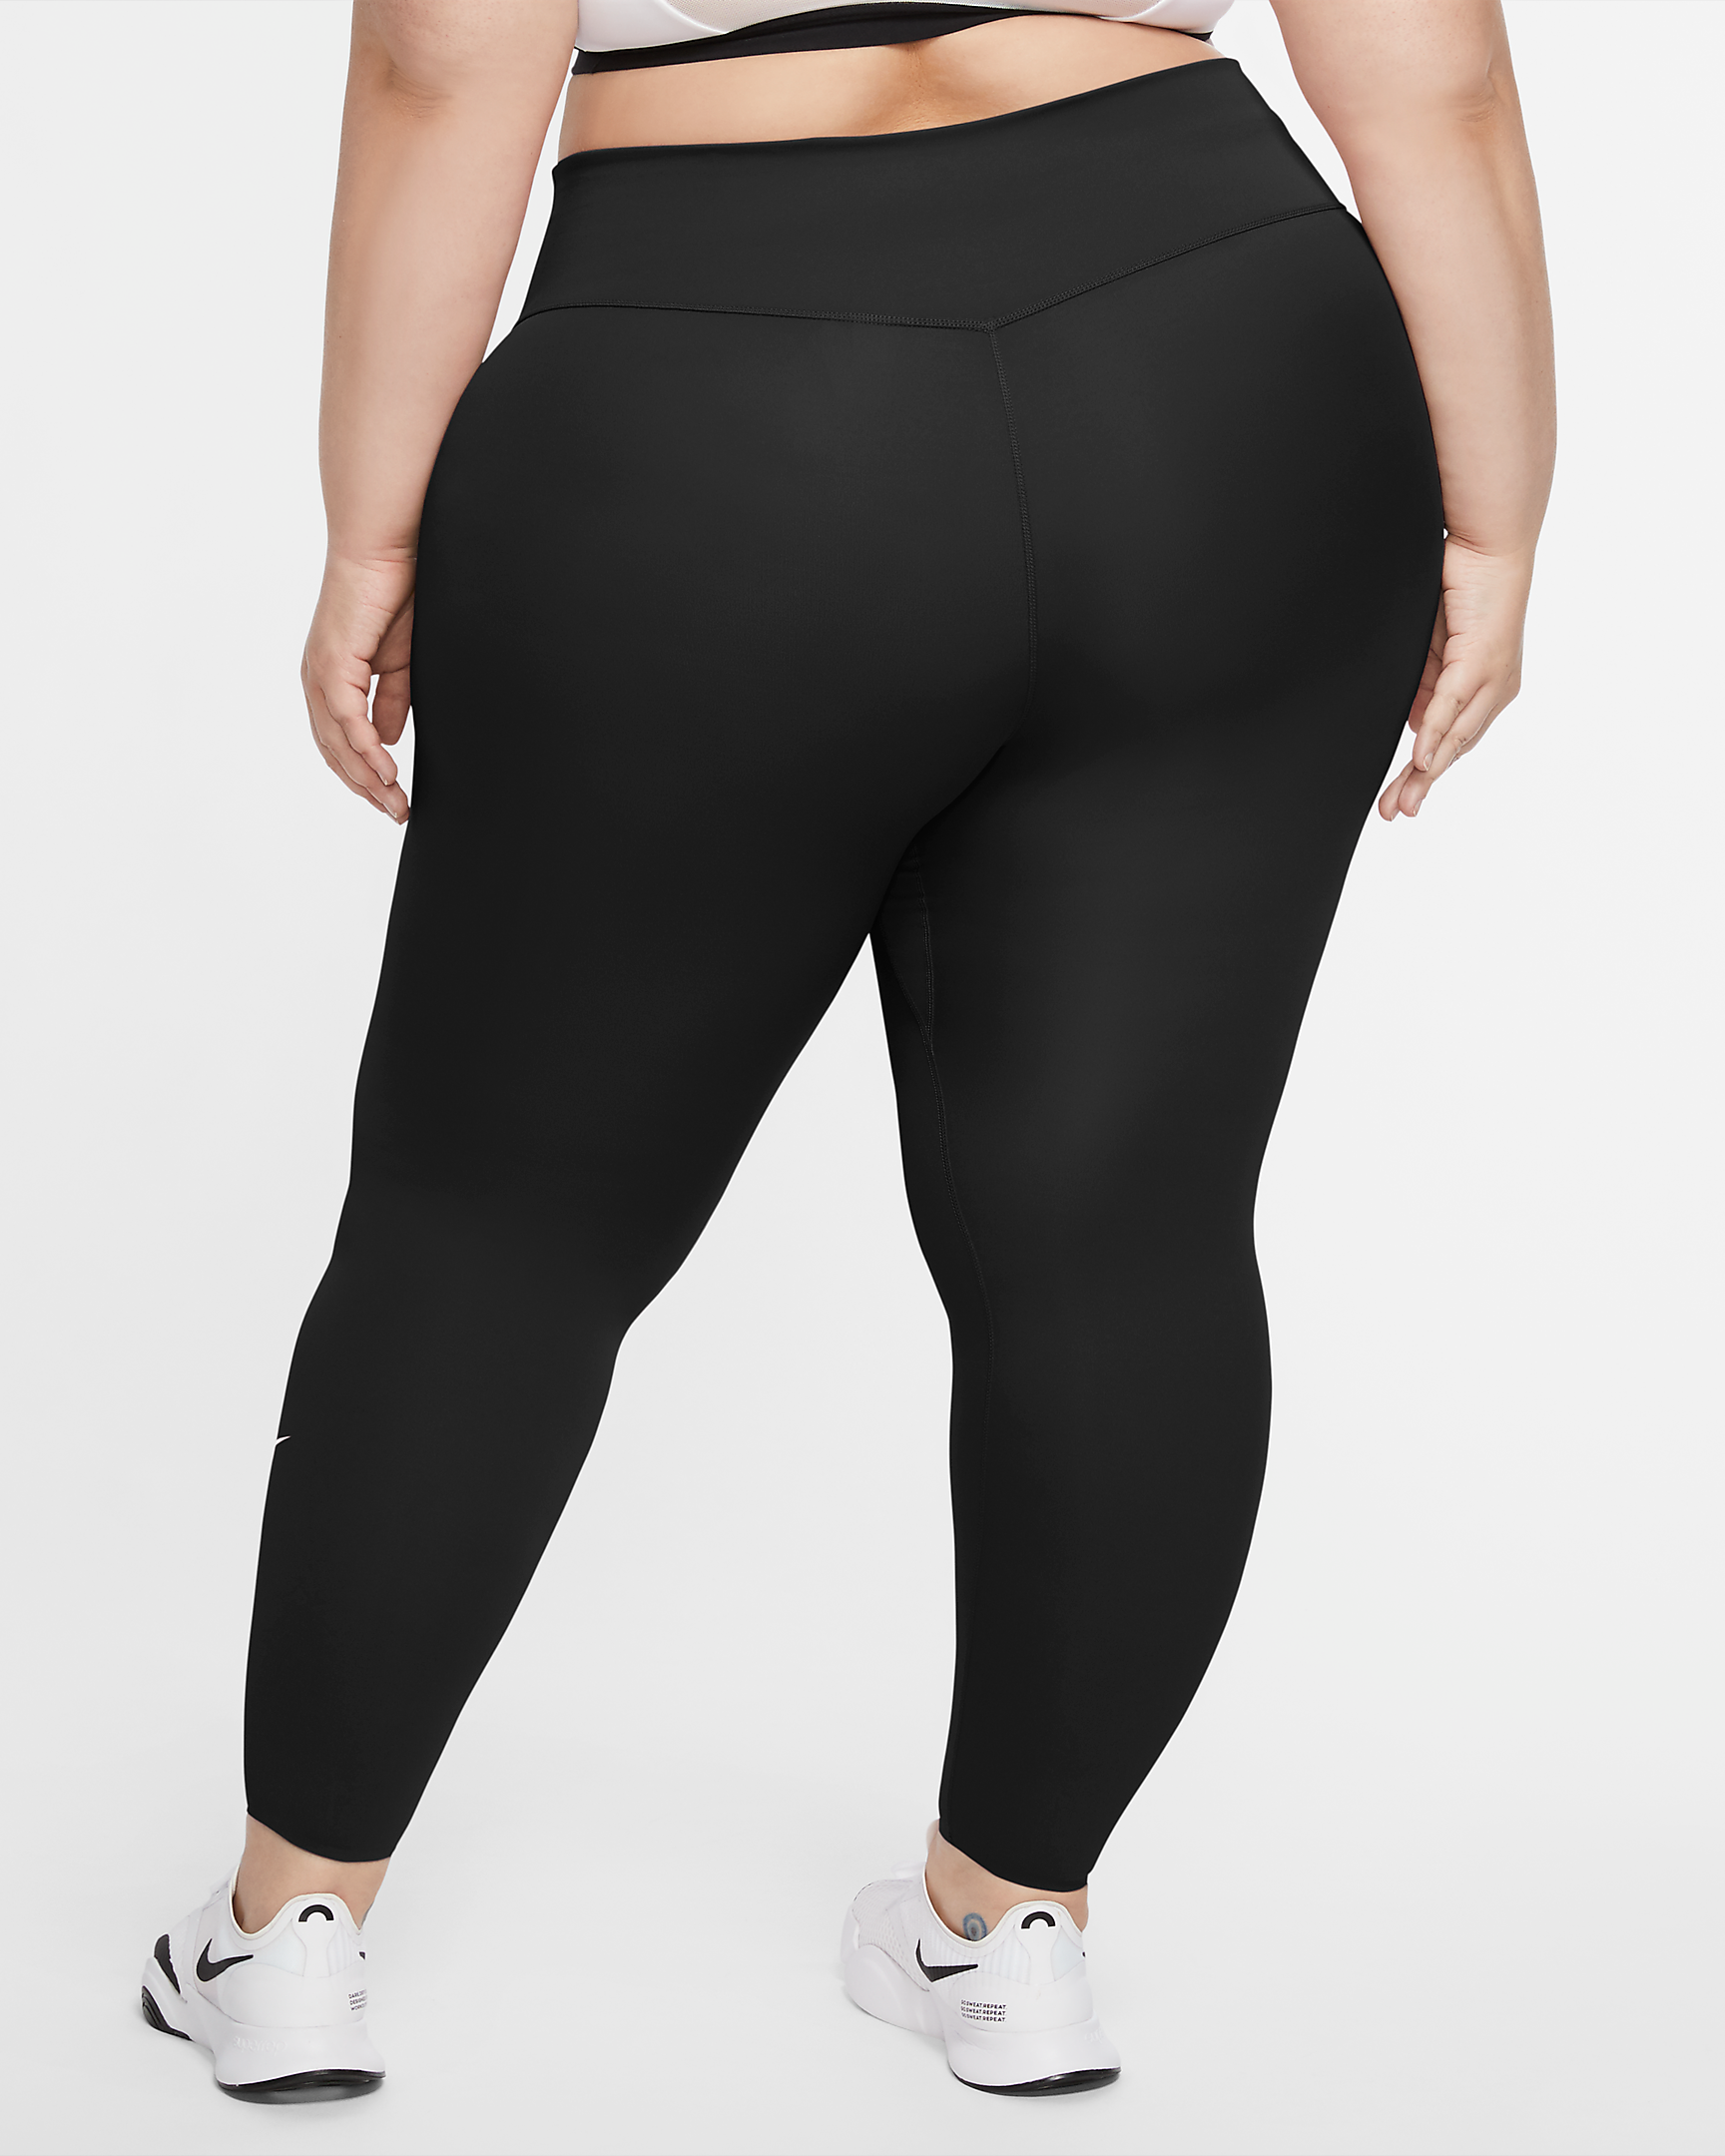 WOMEN'S ONE LUXE MID-RISE TIGHT CLEARANCE